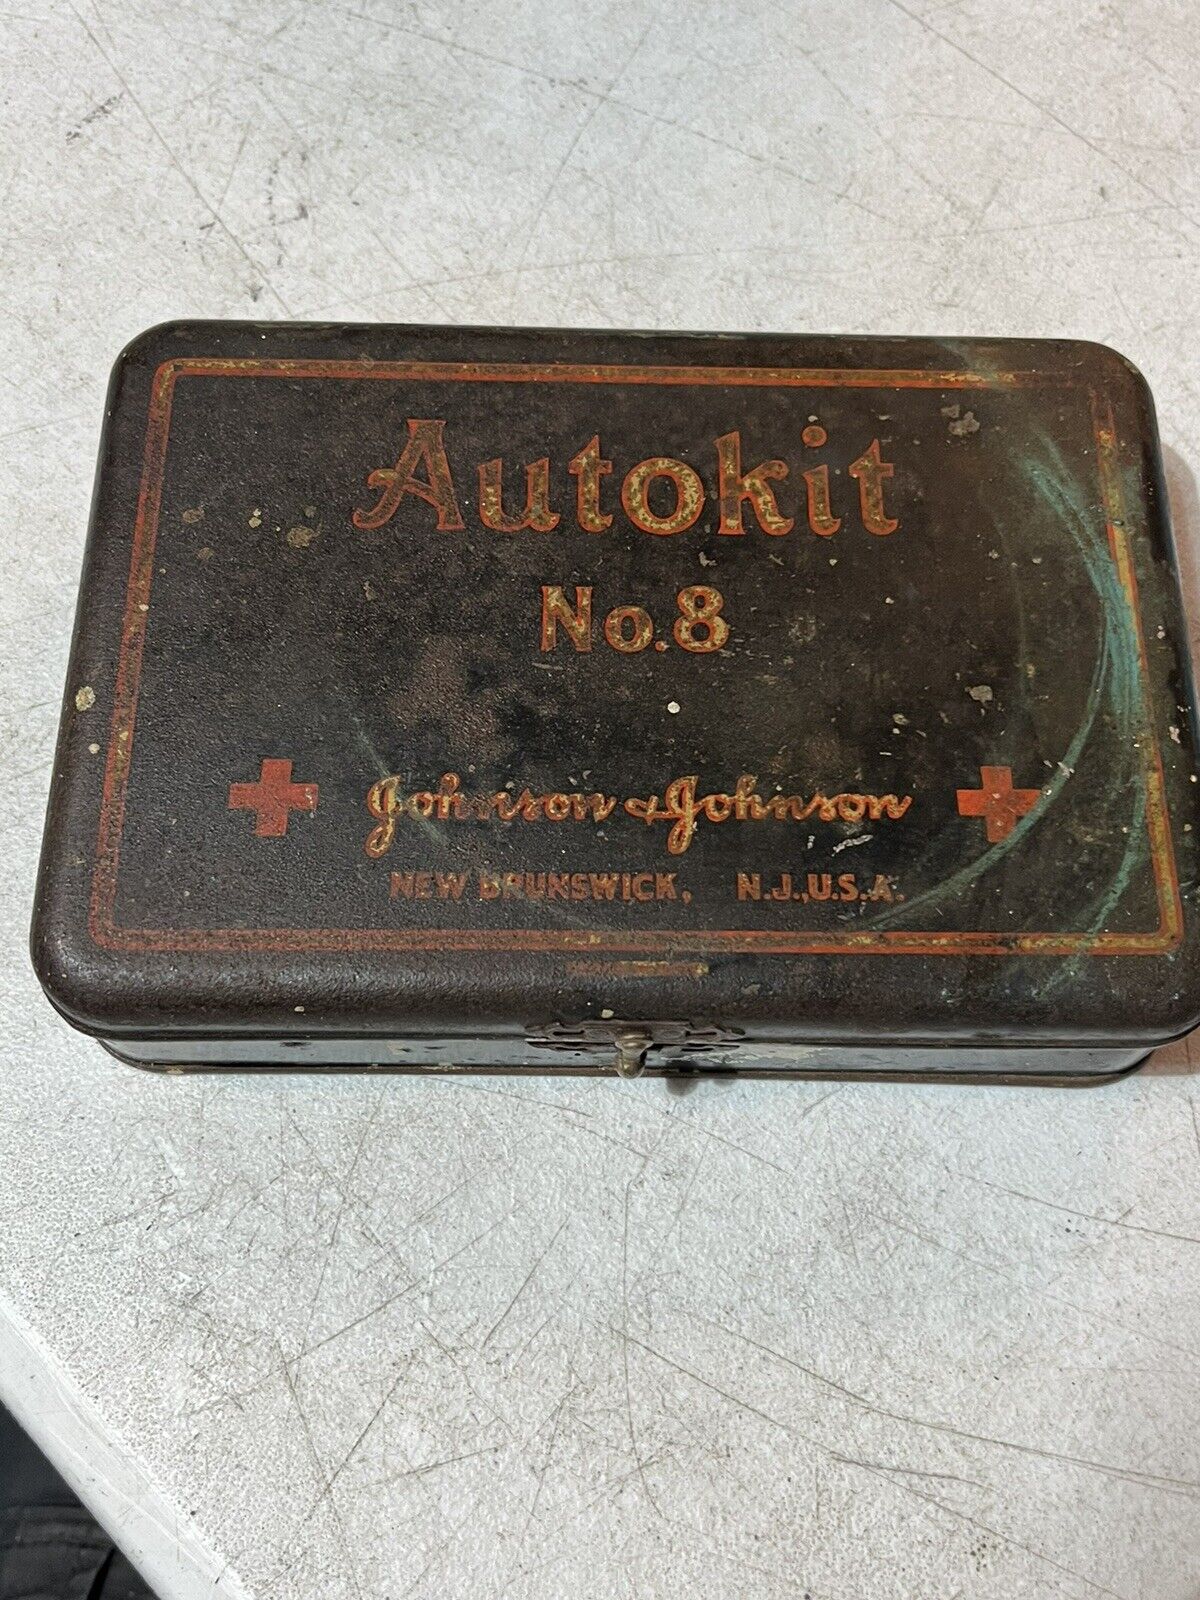 Vintage AUTOKIT No.8 Johnson and Johnson Travel Auto First Aid Complet Full Kit